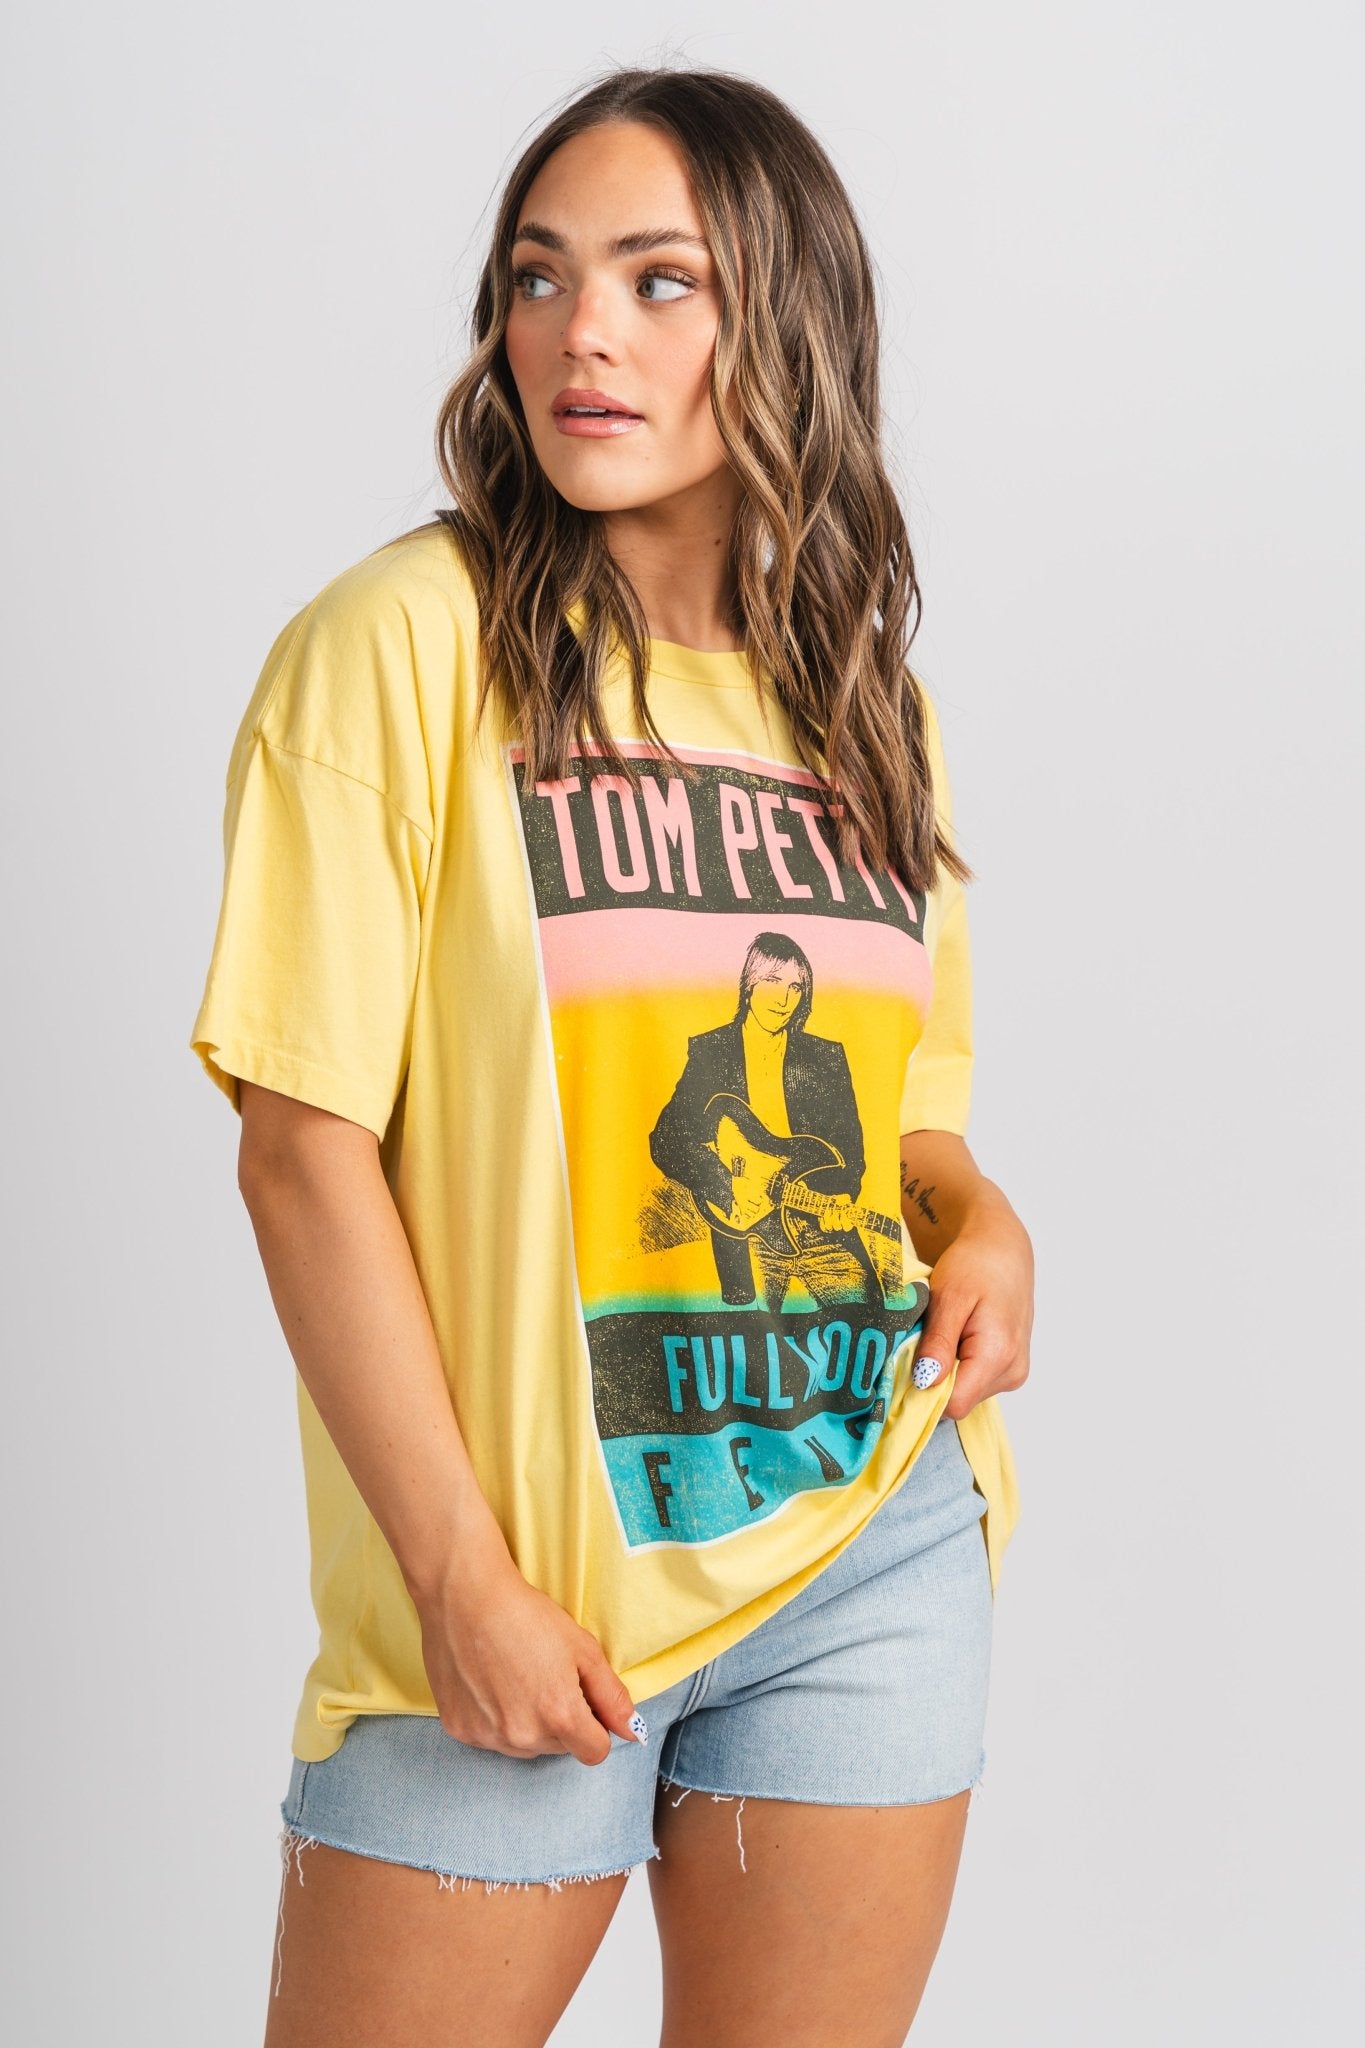 DayDreamer Tom Petty full moon fever t-shirt yellow bloom - Unique Band T-Shirts and Sweatshirts at Lush Fashion Lounge Boutique in Oklahoma City